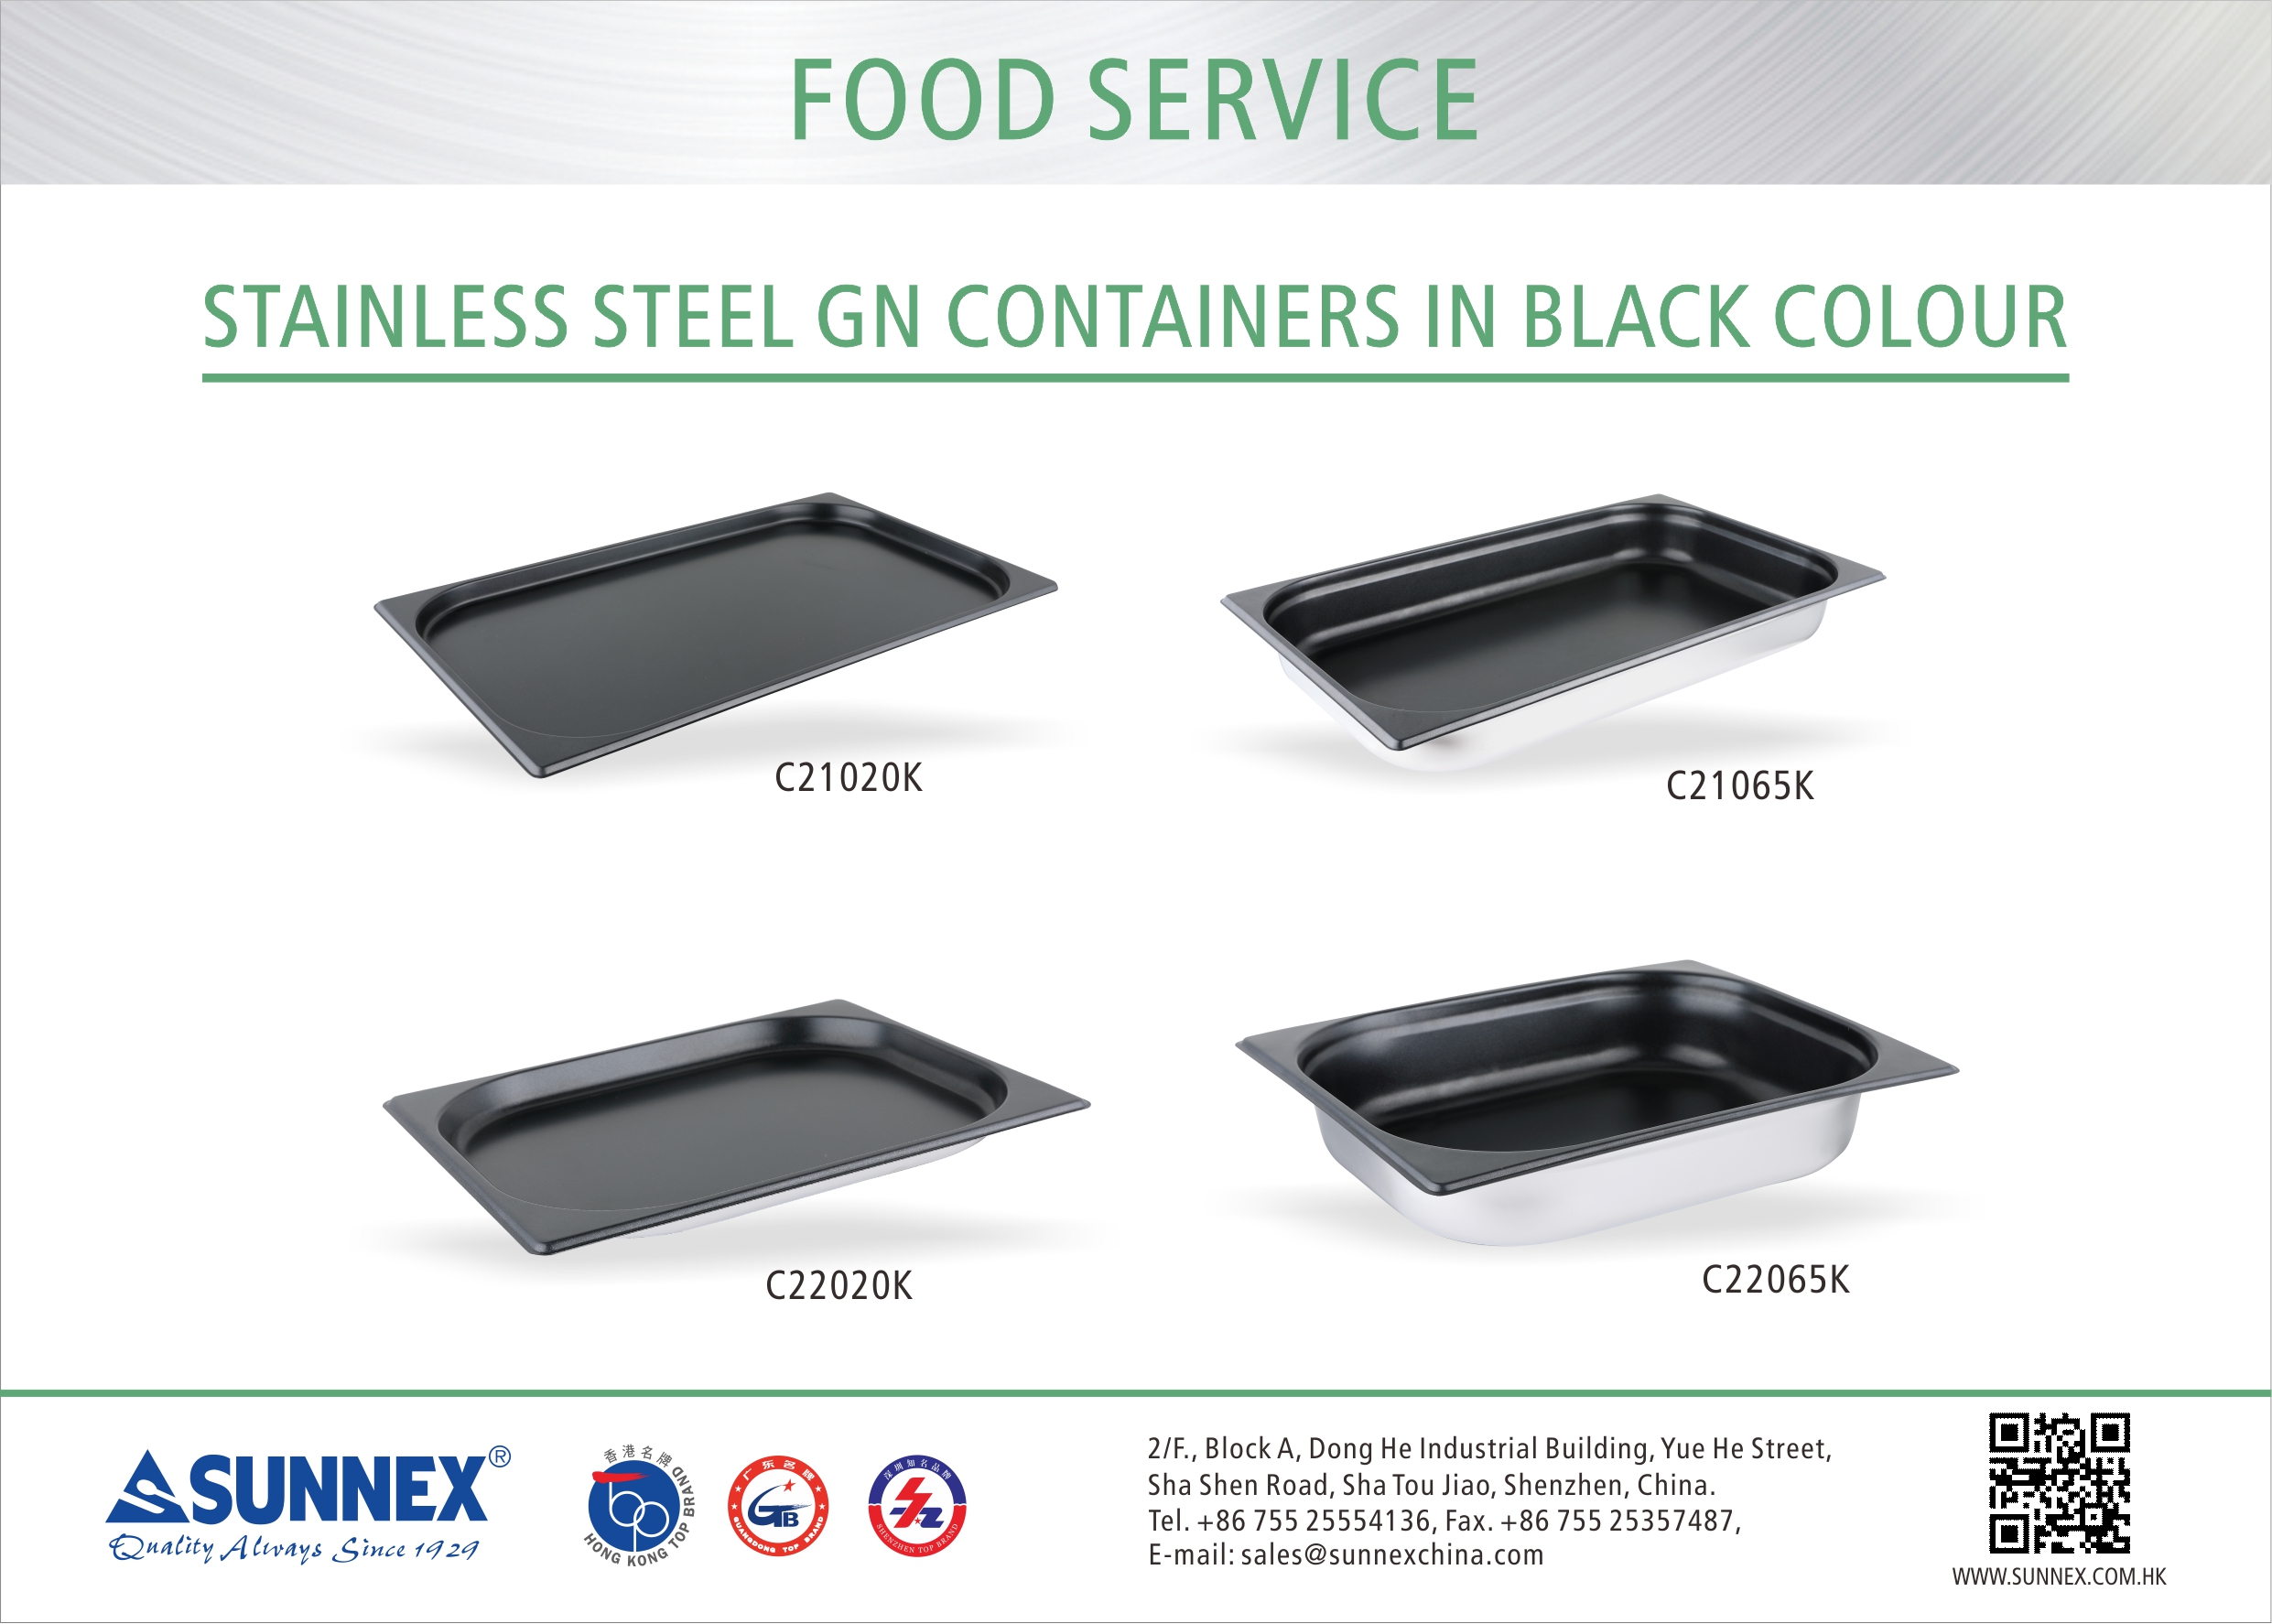 Sunnex stainless steel GN containers in black colour